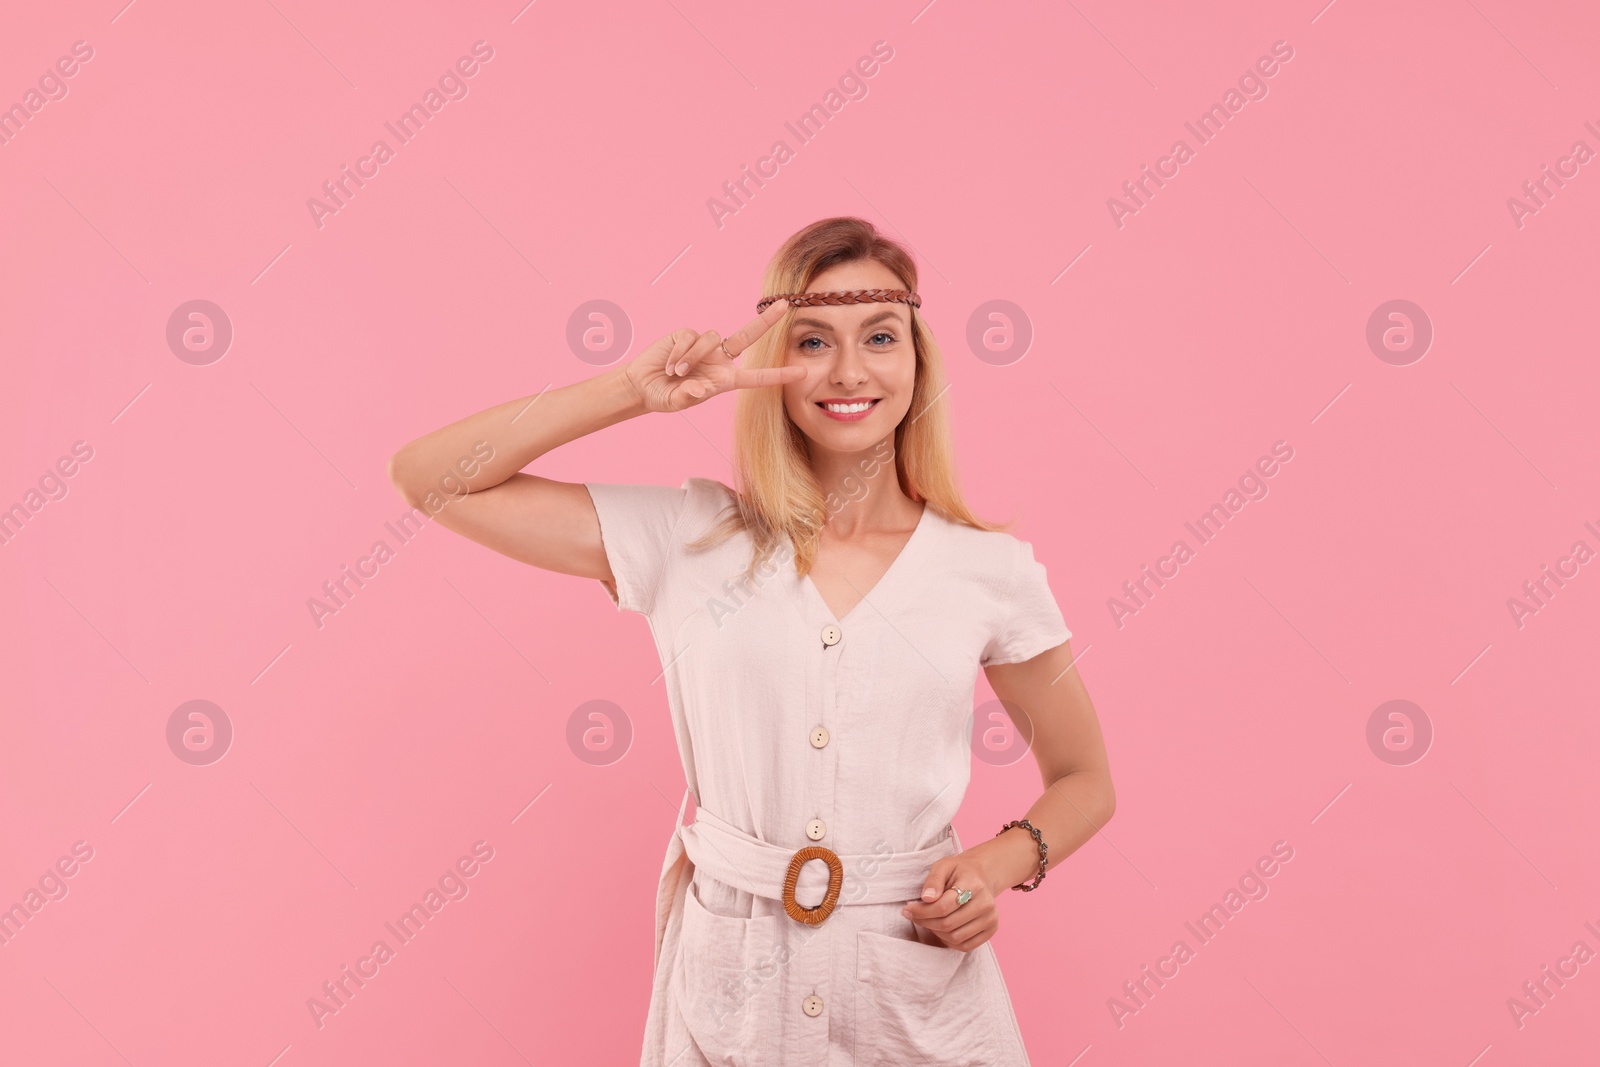 Photo of Portrait of smiling hippie woman showing peace sign on pink background